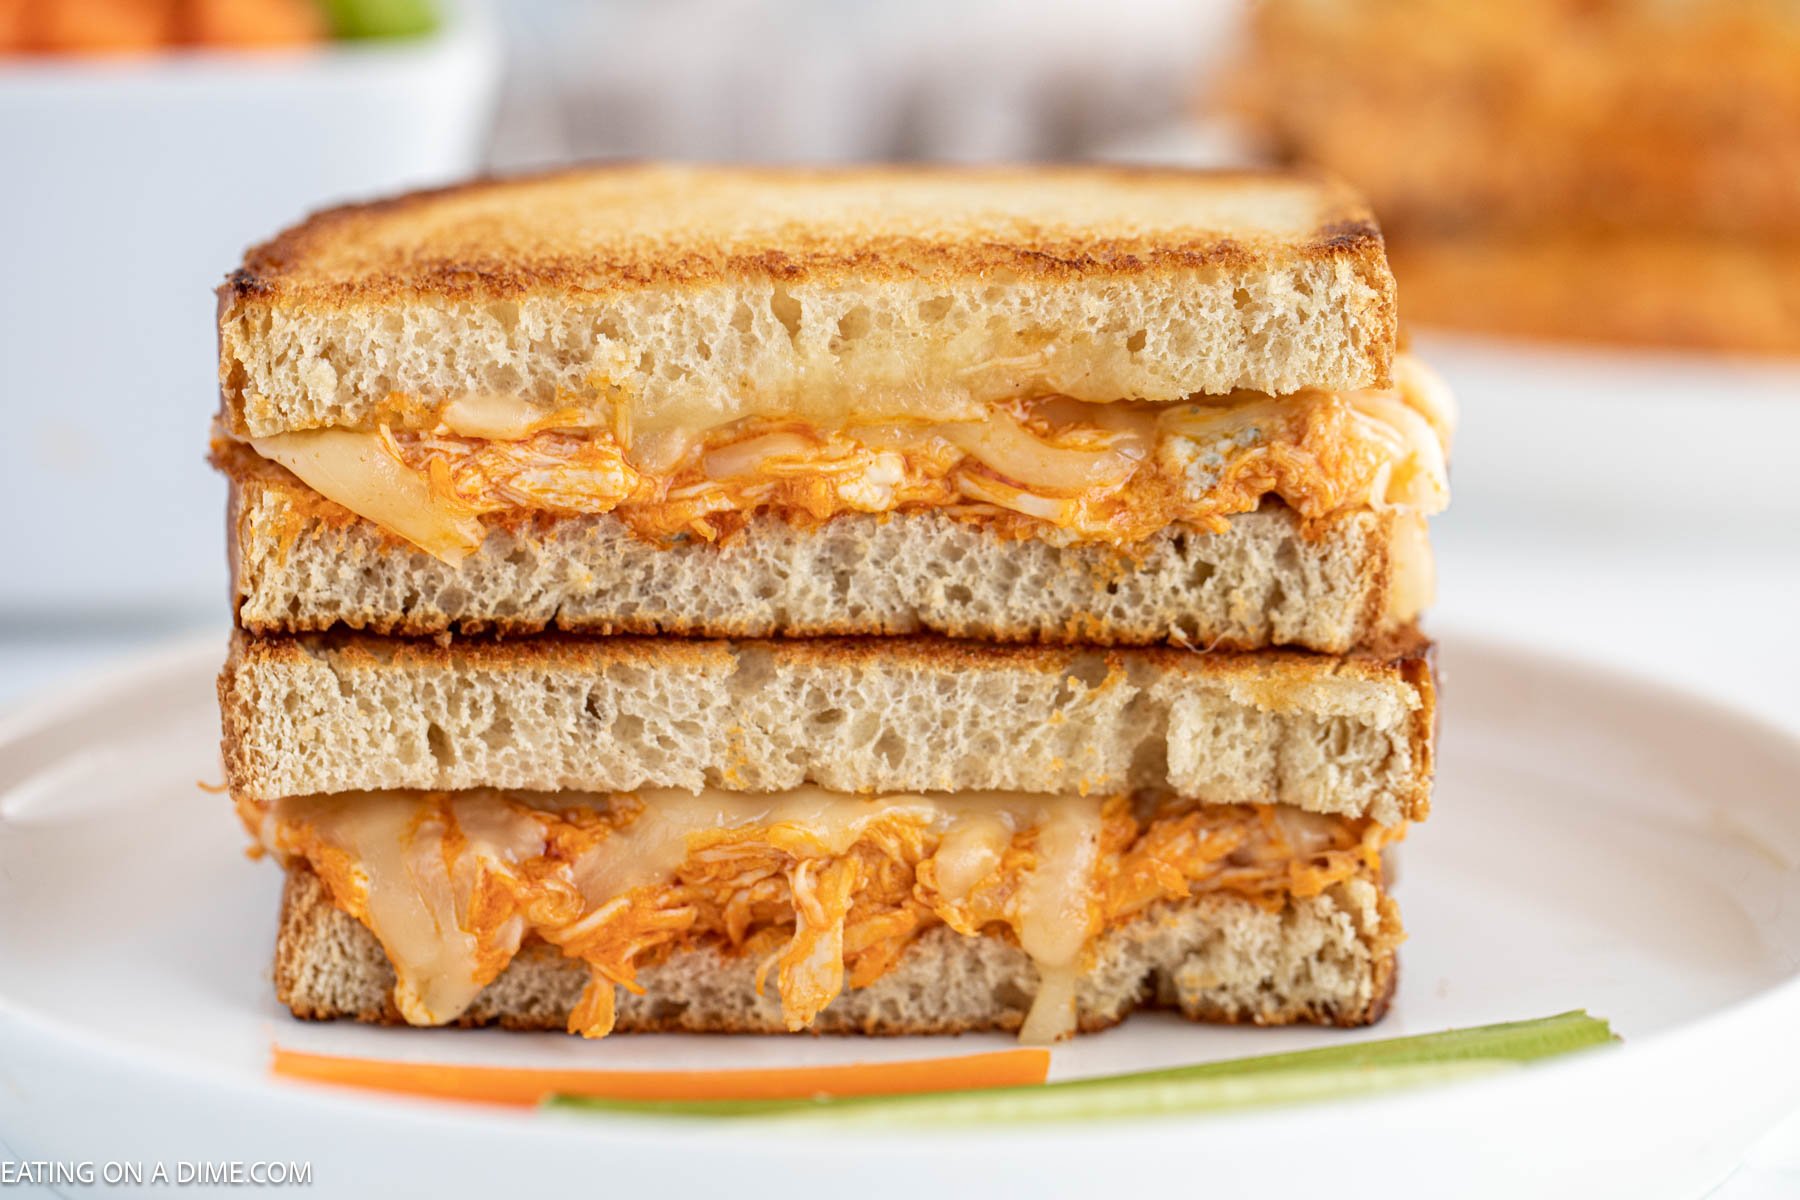 Buffalo Grilled Cheese Sandwich stacked on a plate with celery and carrots